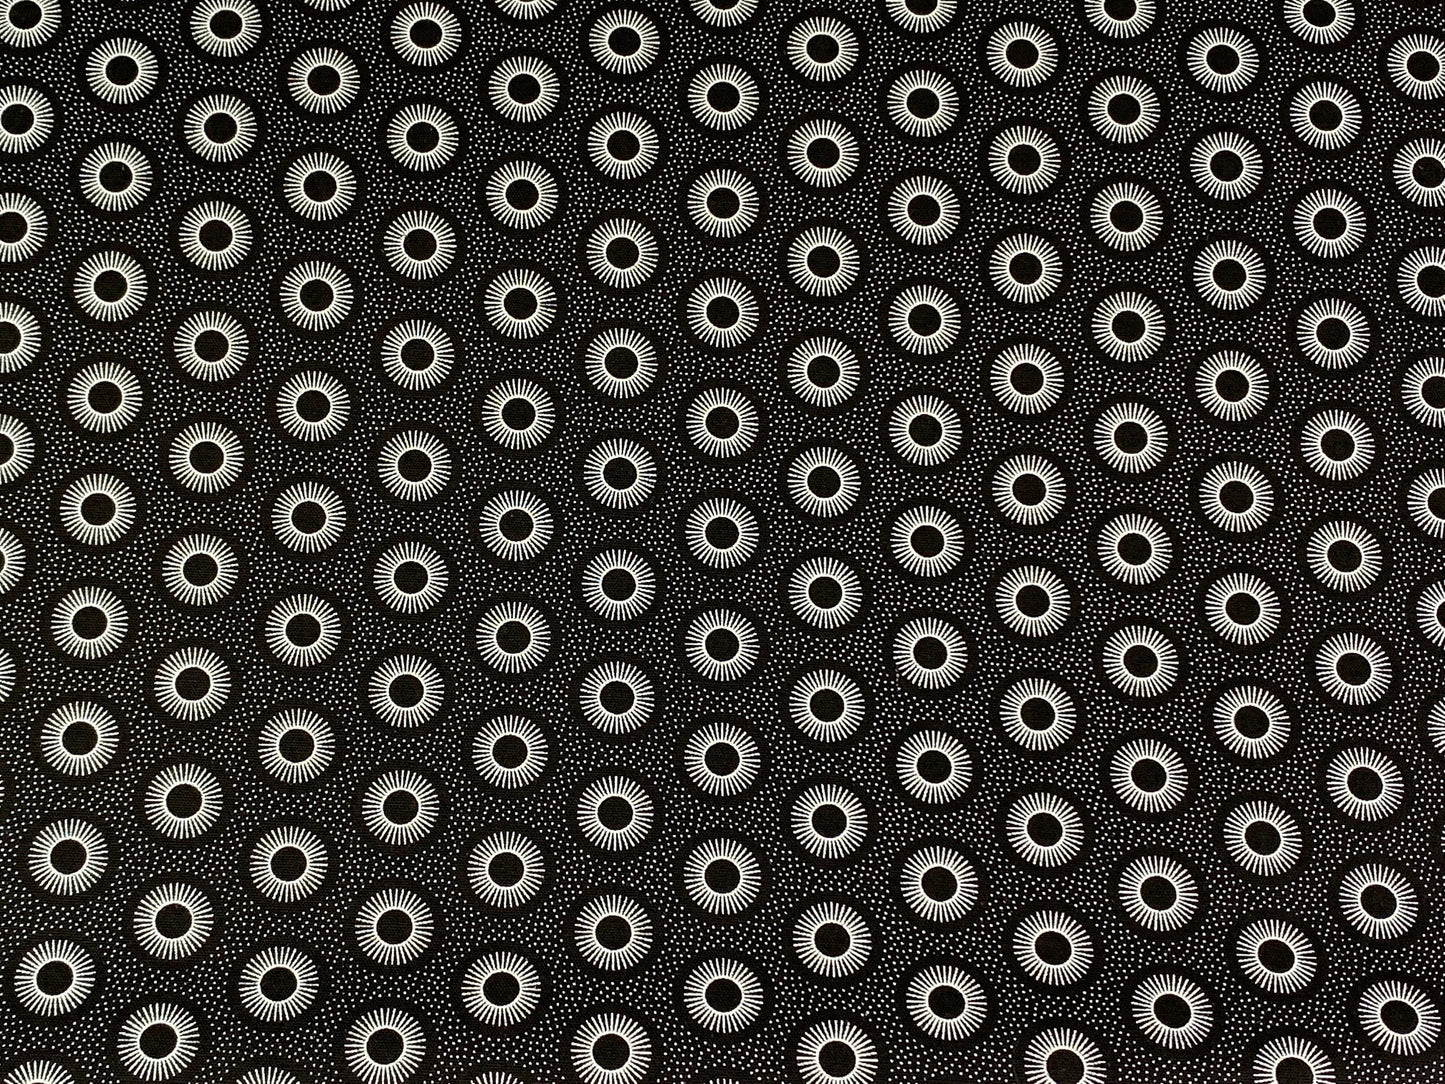 South African Shweshwe Fabric by the YARD. Genuine DaGama 3 Cats Black & White Little Suns. 100% Cotton Fabric for Quilting, Apparel, Decor